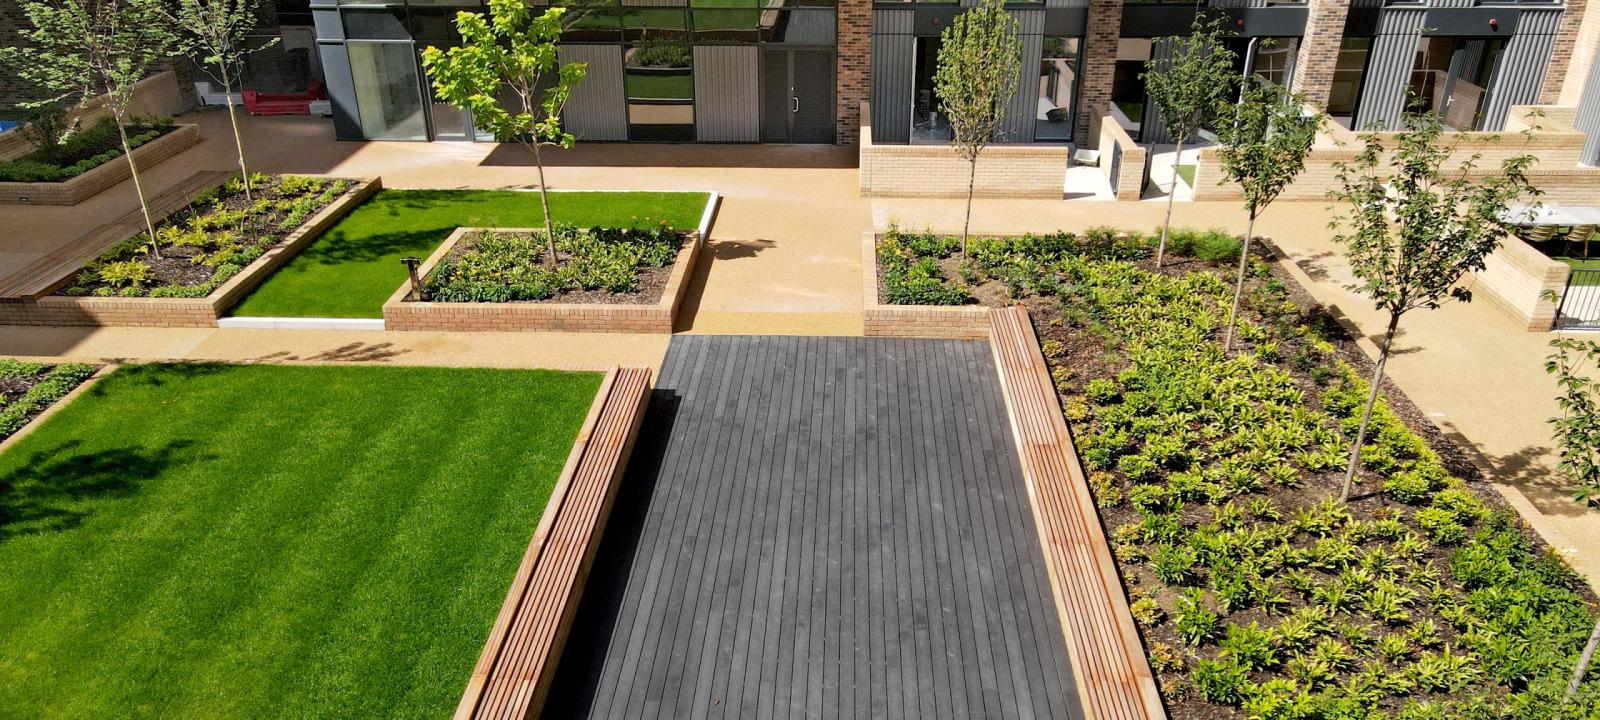 Residential courtyard with wooden benches, lawn, perennials and small trees